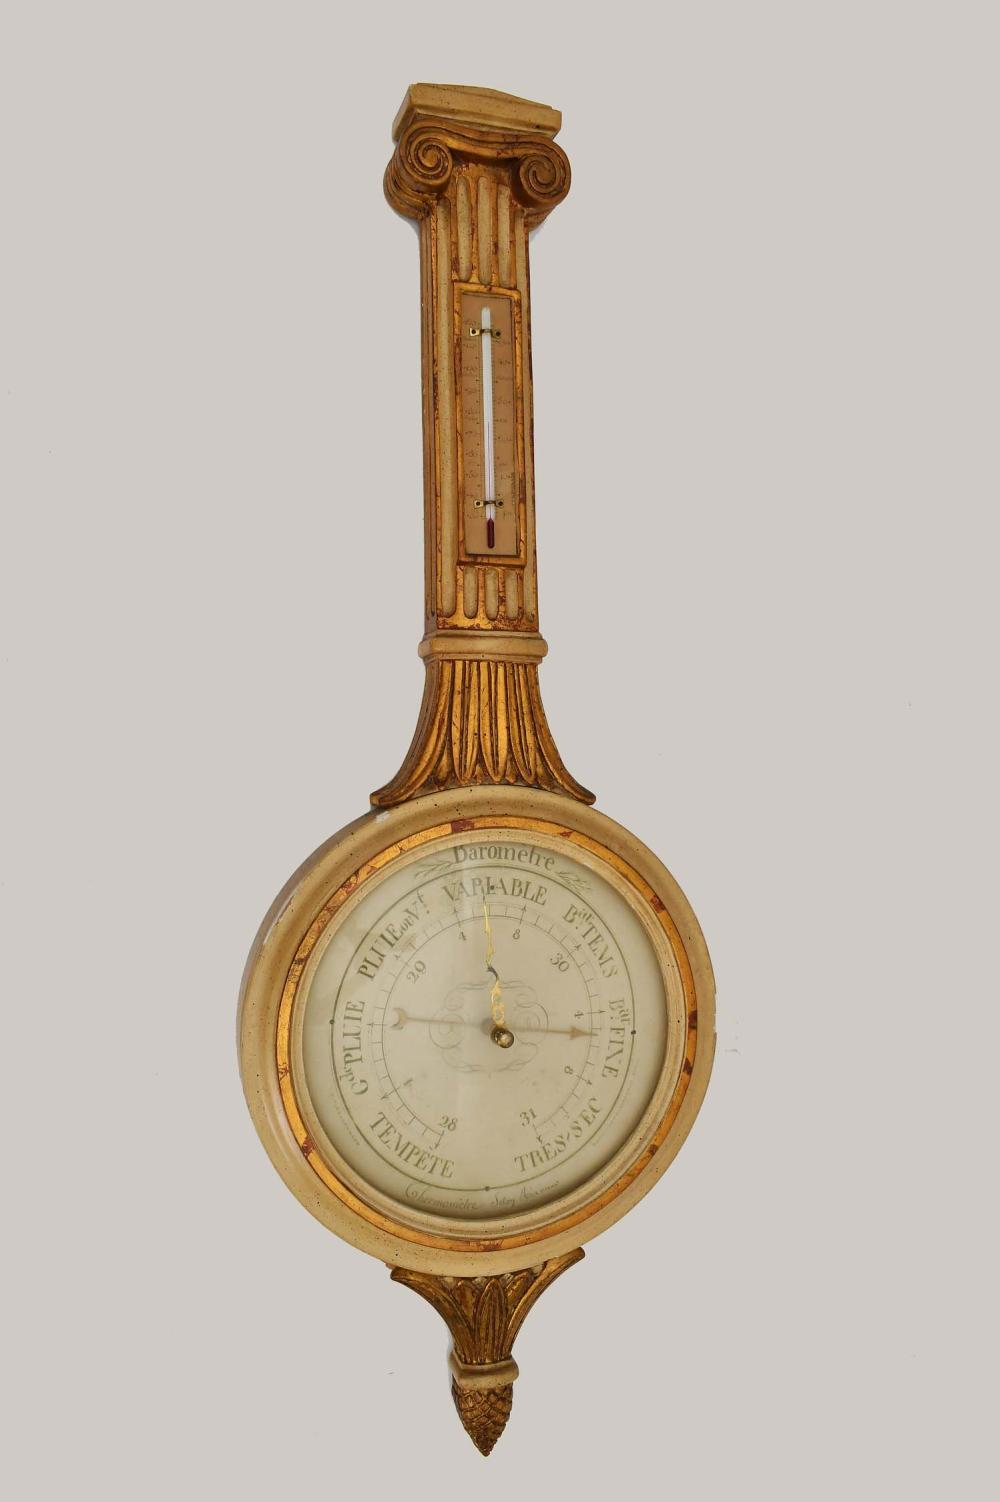 LOUIS XVI STYLE BAROMETER THERMOMETERThe 3541a4